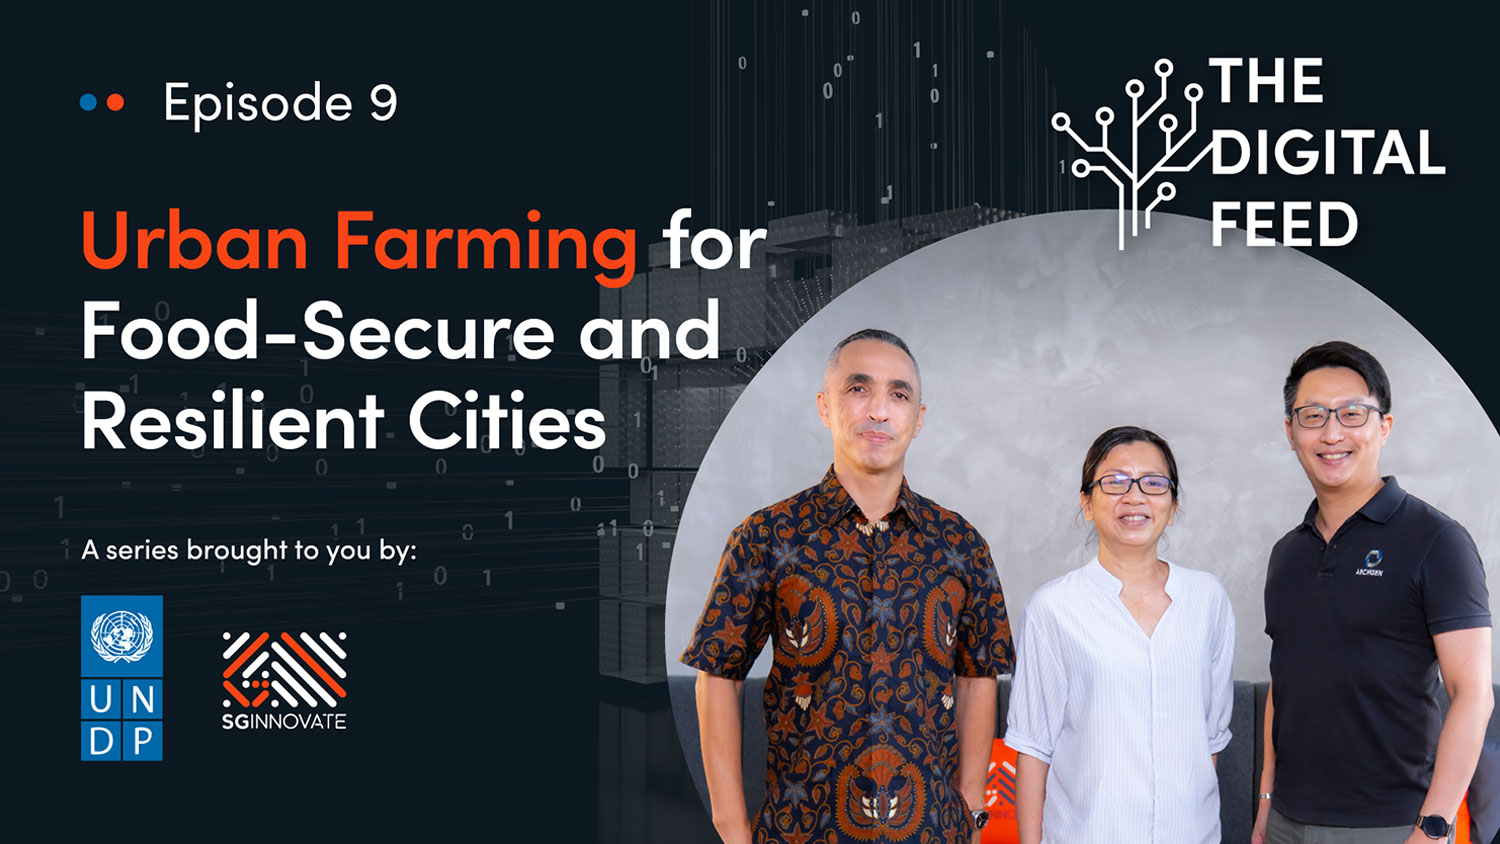 The Digital Feed Episode 9: Urban Farming for Food-Secure and Resilient Cities